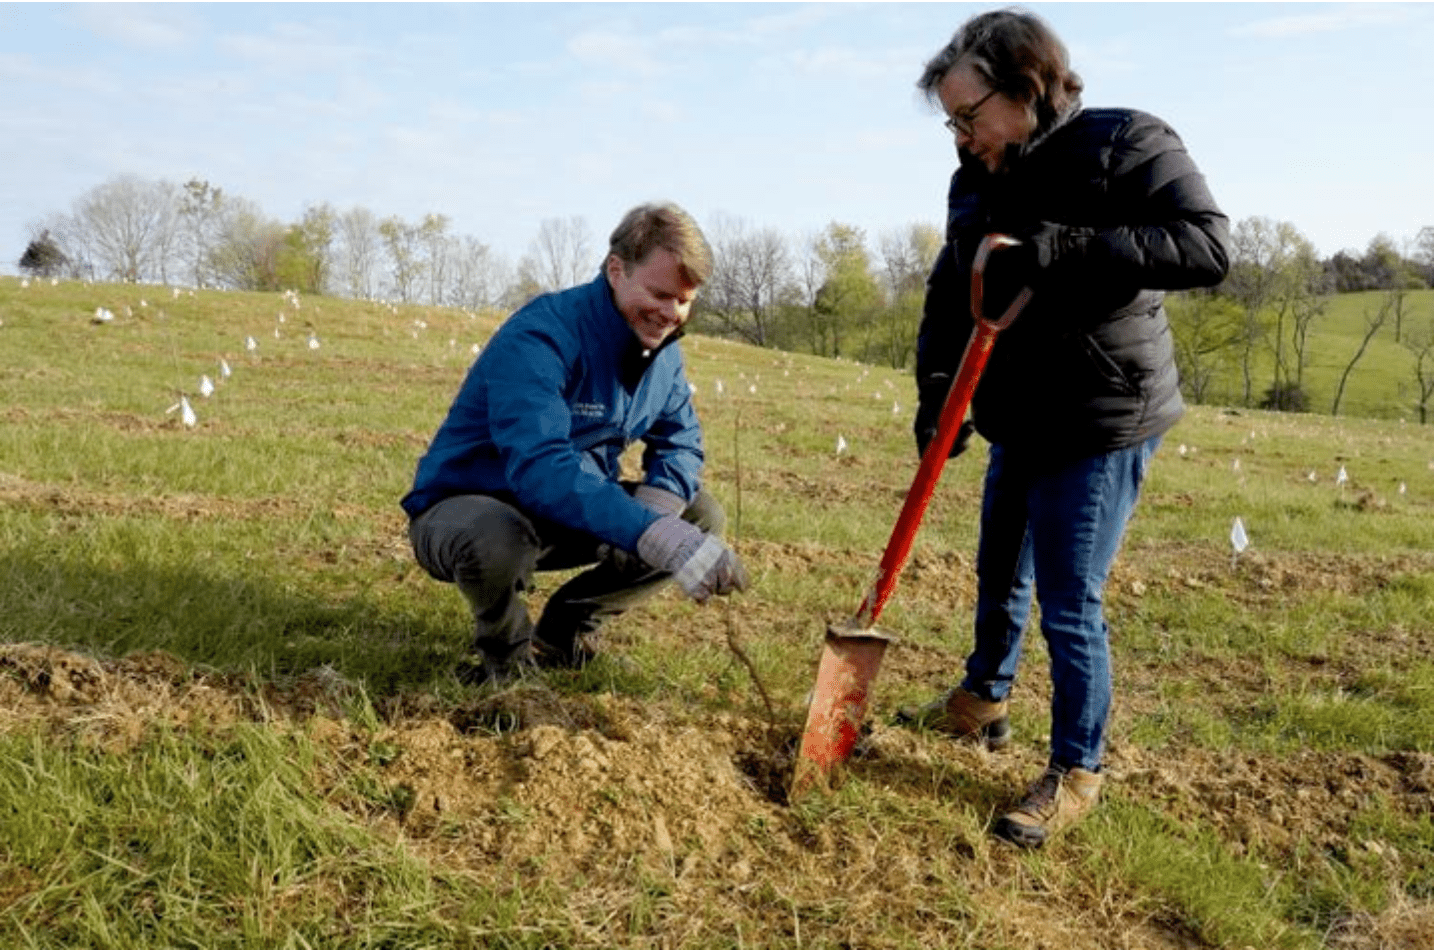 Image of Rob Samuels and a woman planting trees at Maker's Mark